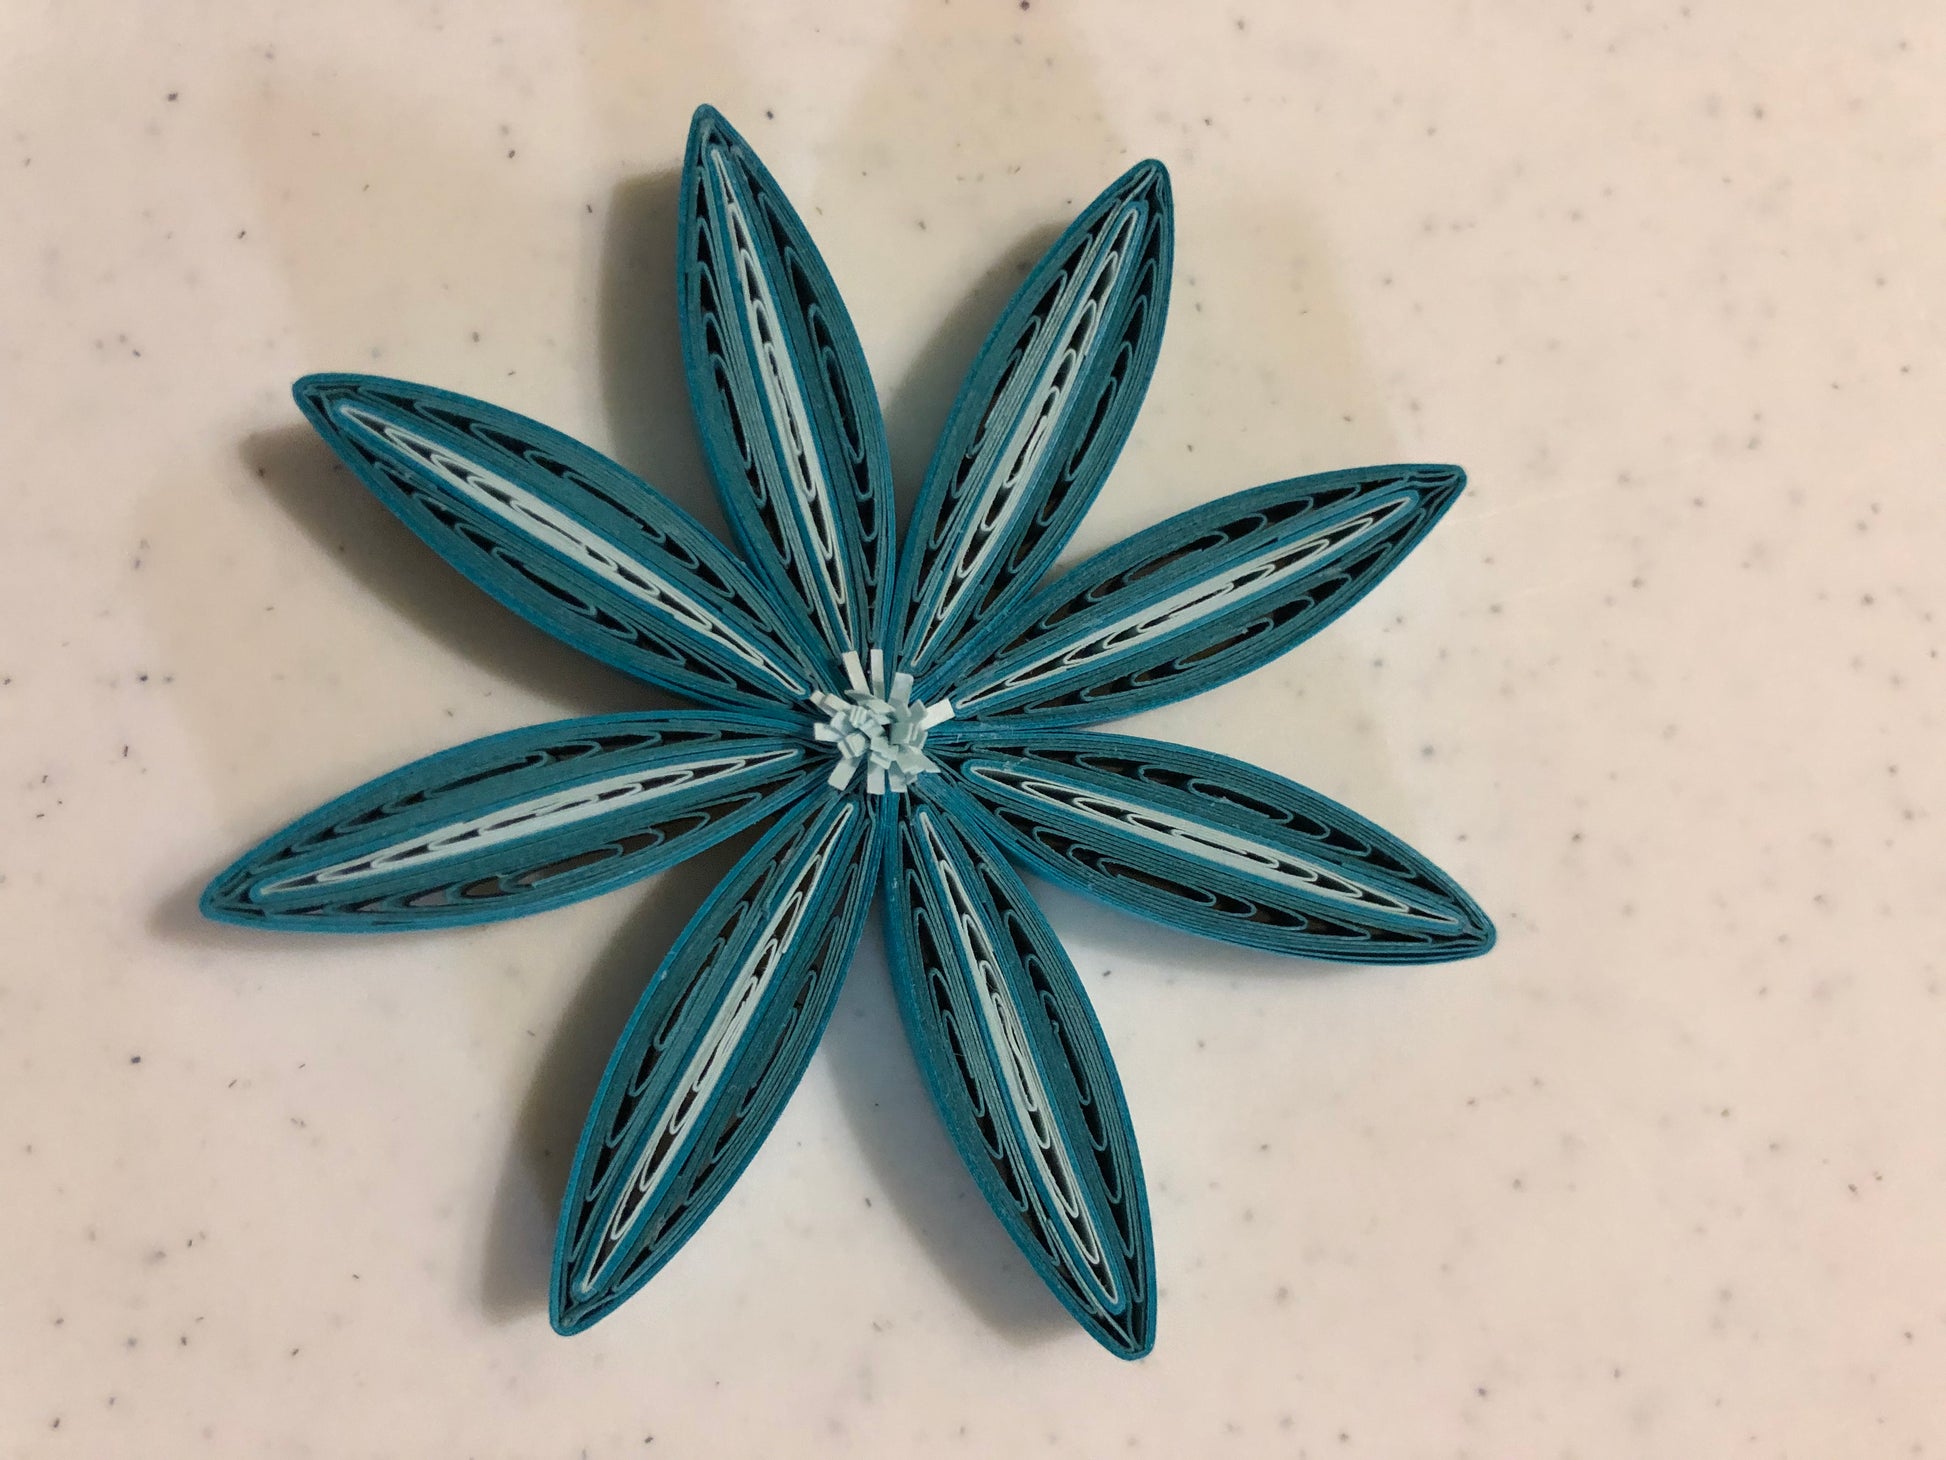 Paper Quilling Tips for Beginners